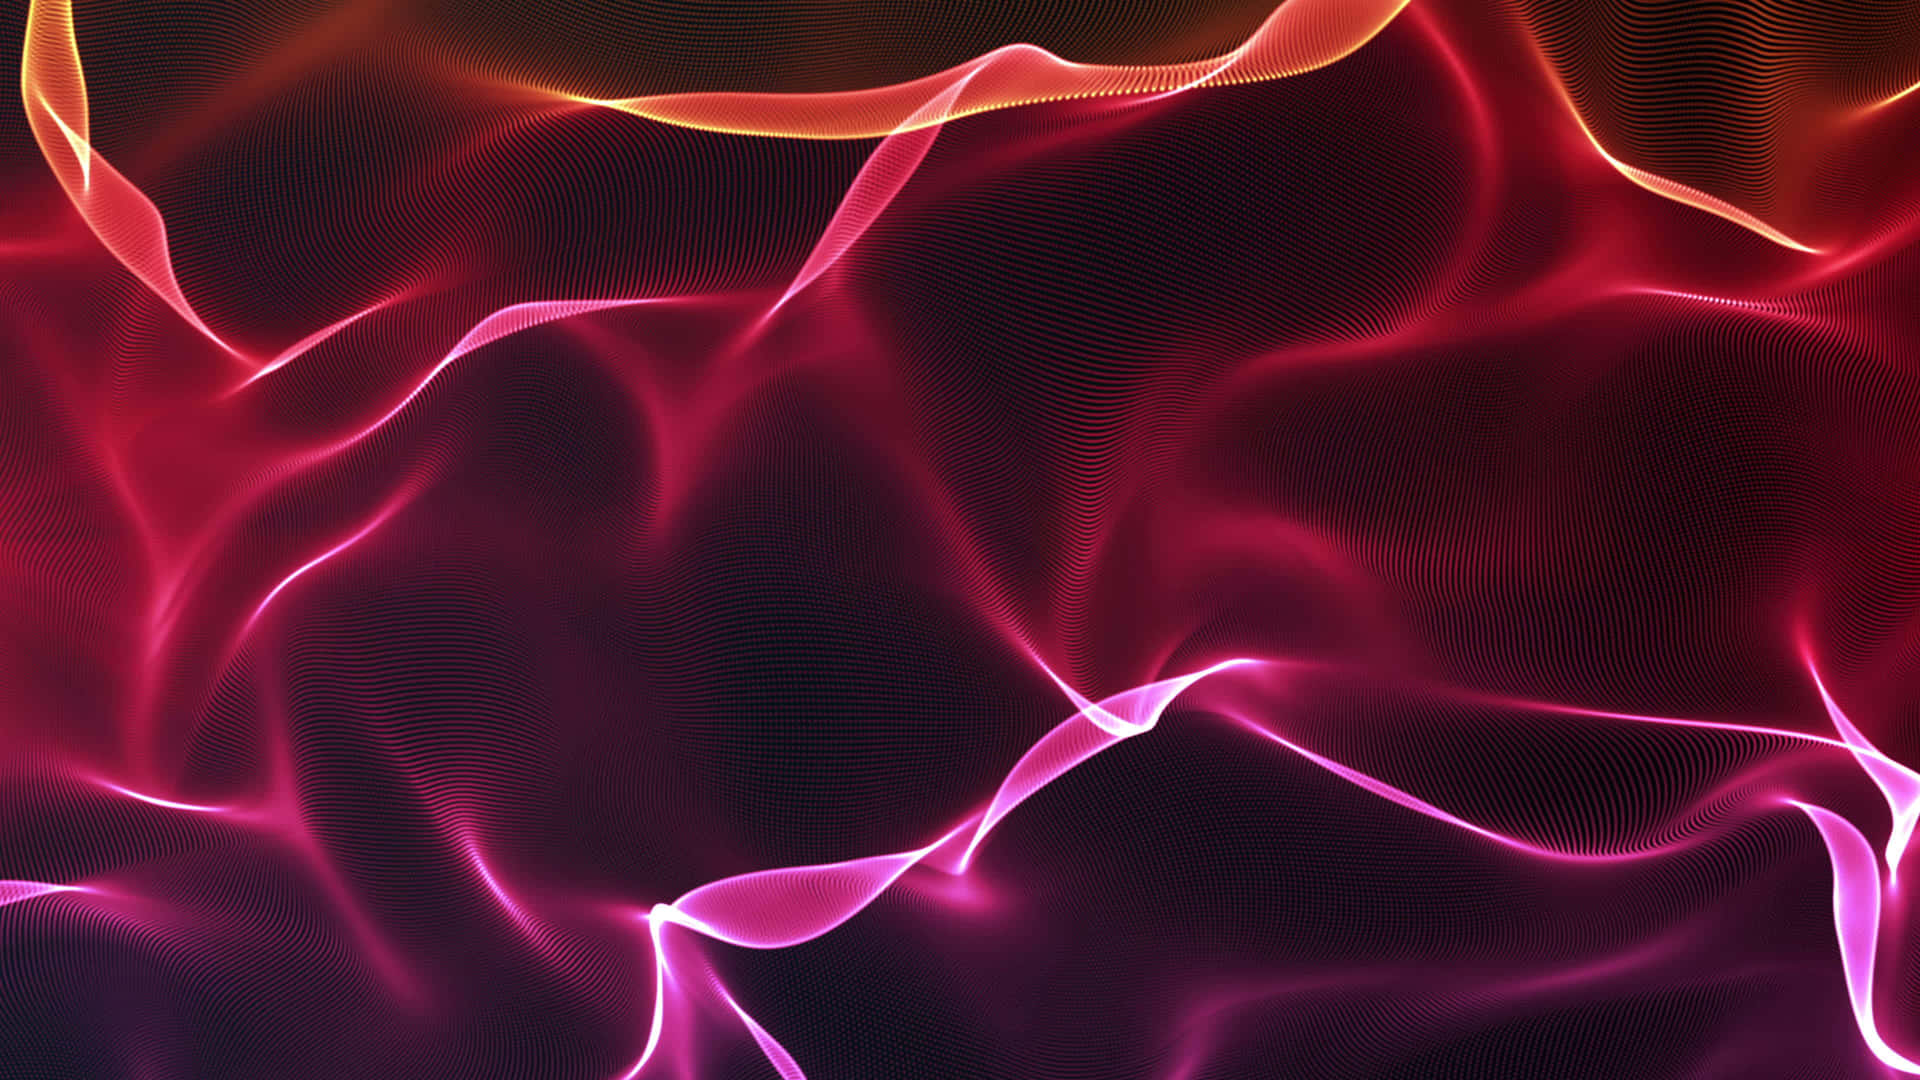 Captivating 3D Abstract Shapes in Vibrant Colors Wallpaper